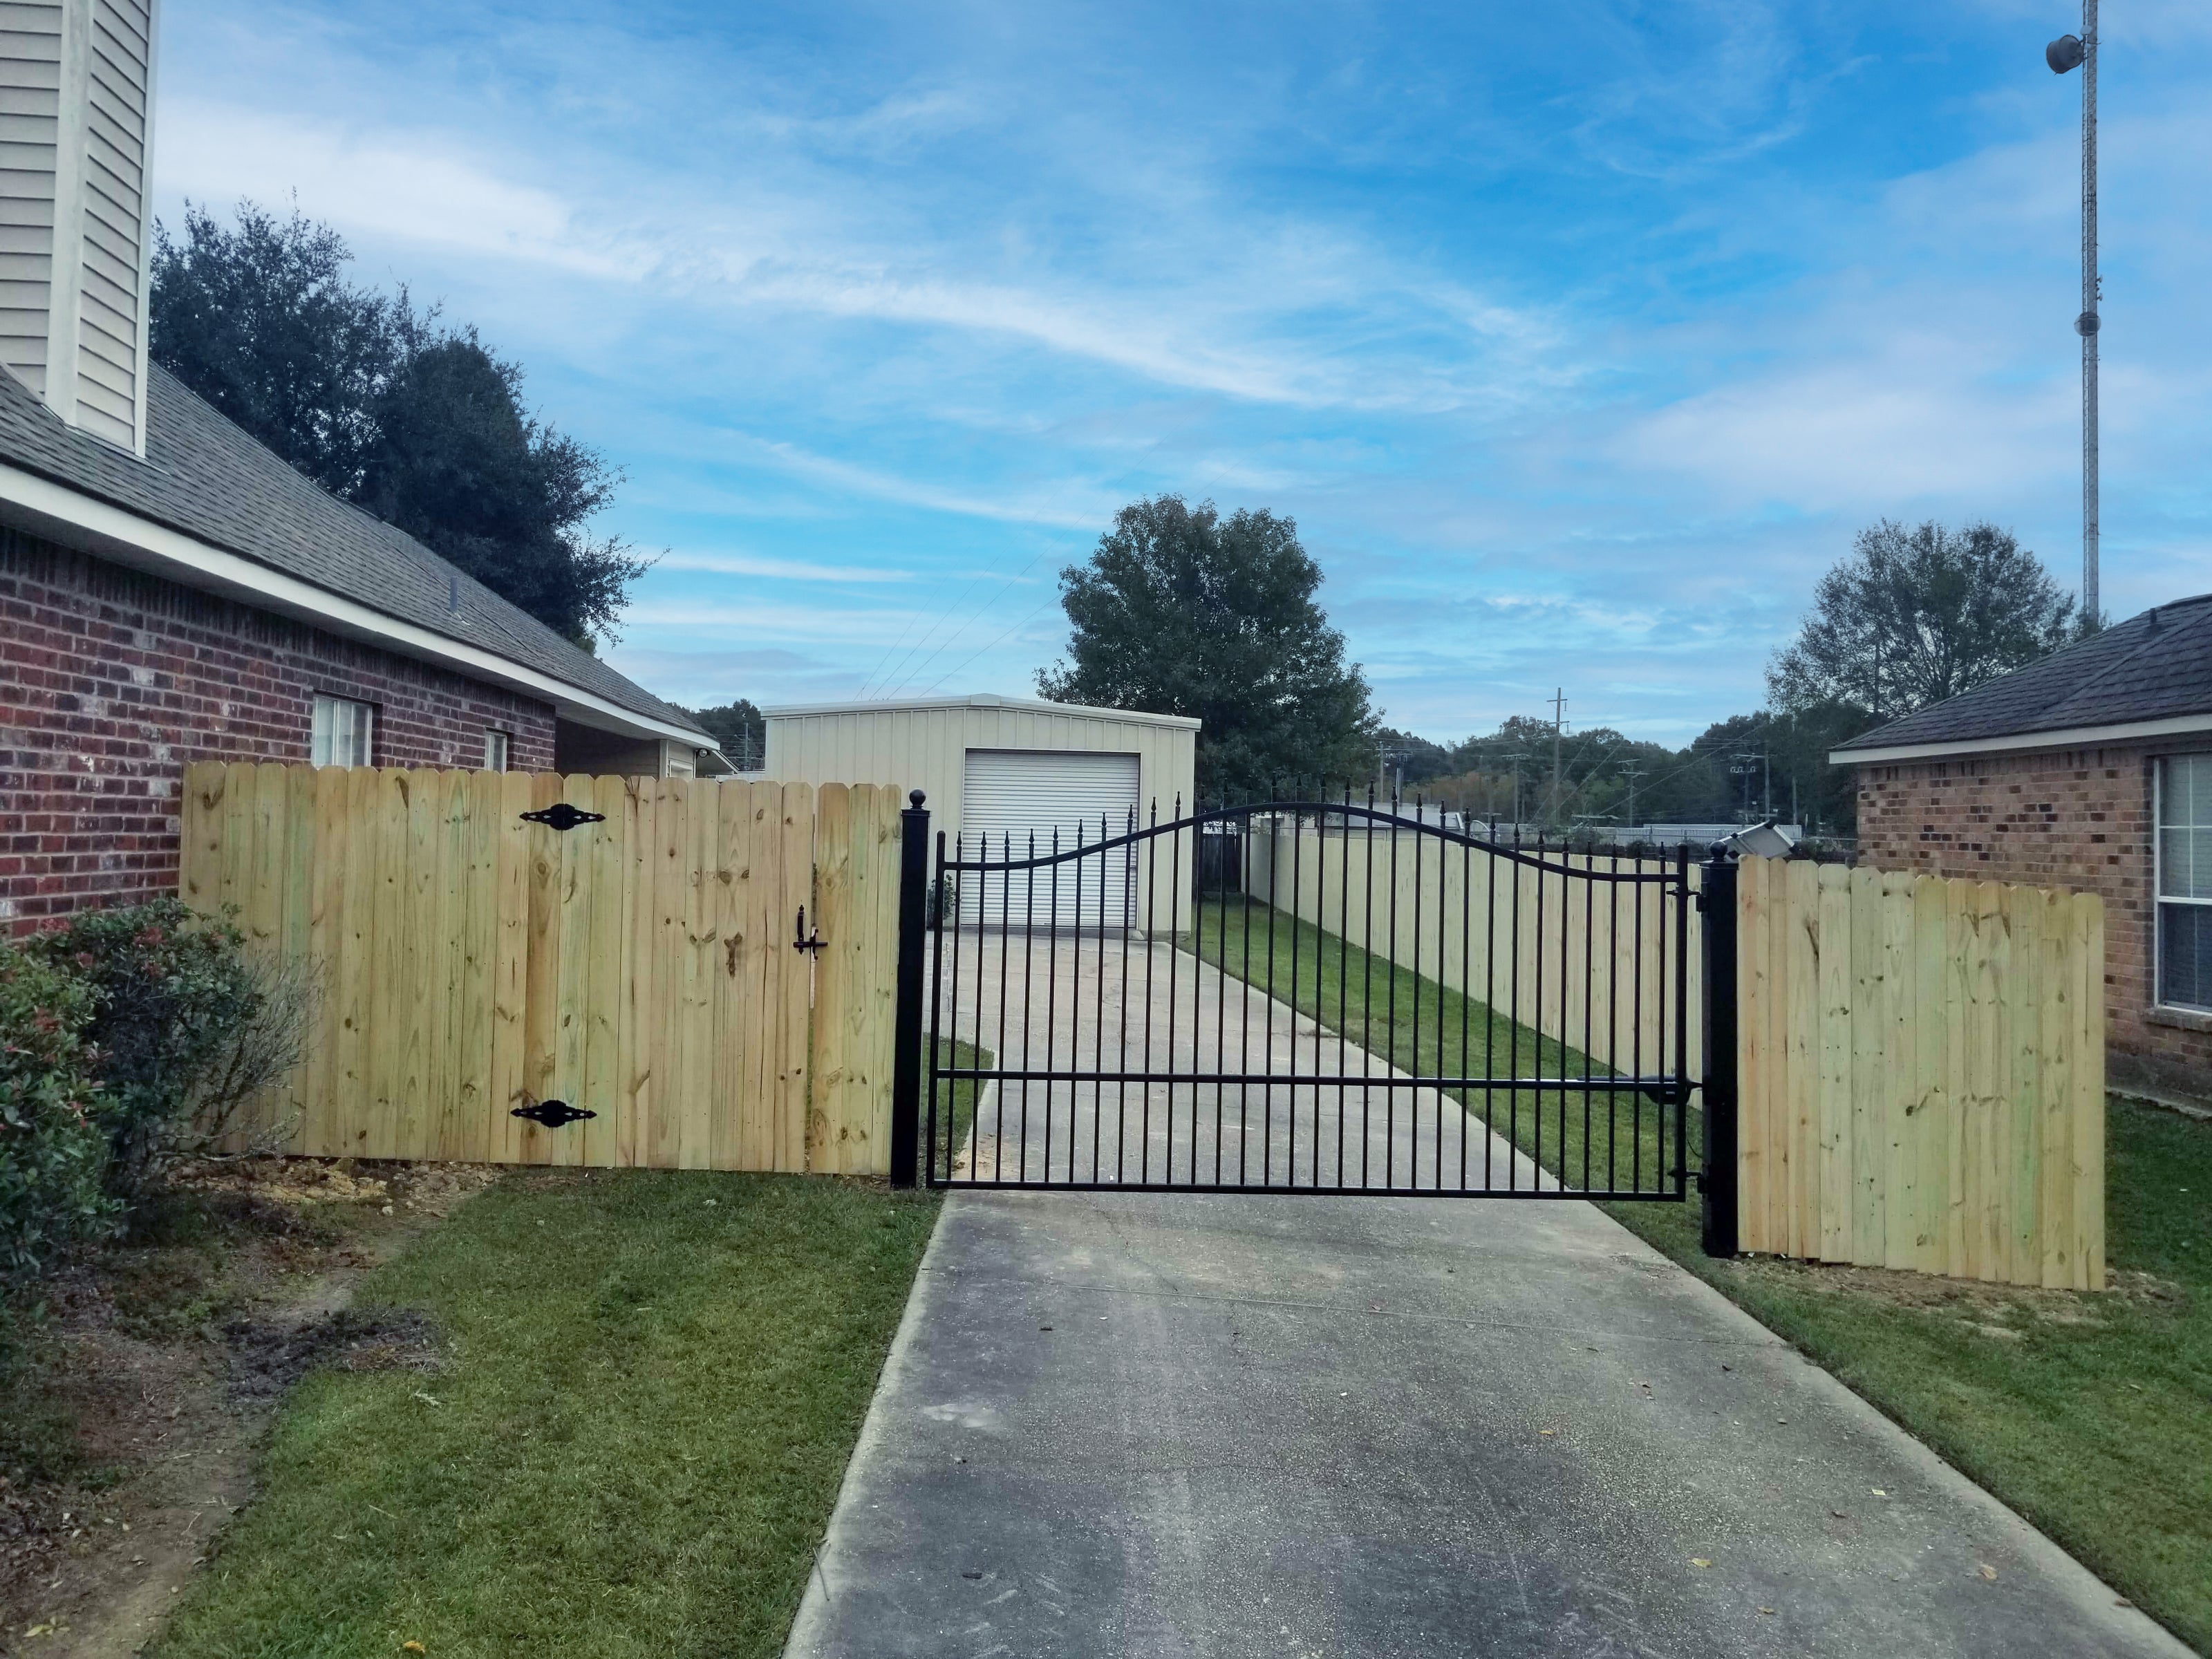 very simple black wrought iron single gate across a driveway mounted in wood fence around backyard of ranch home